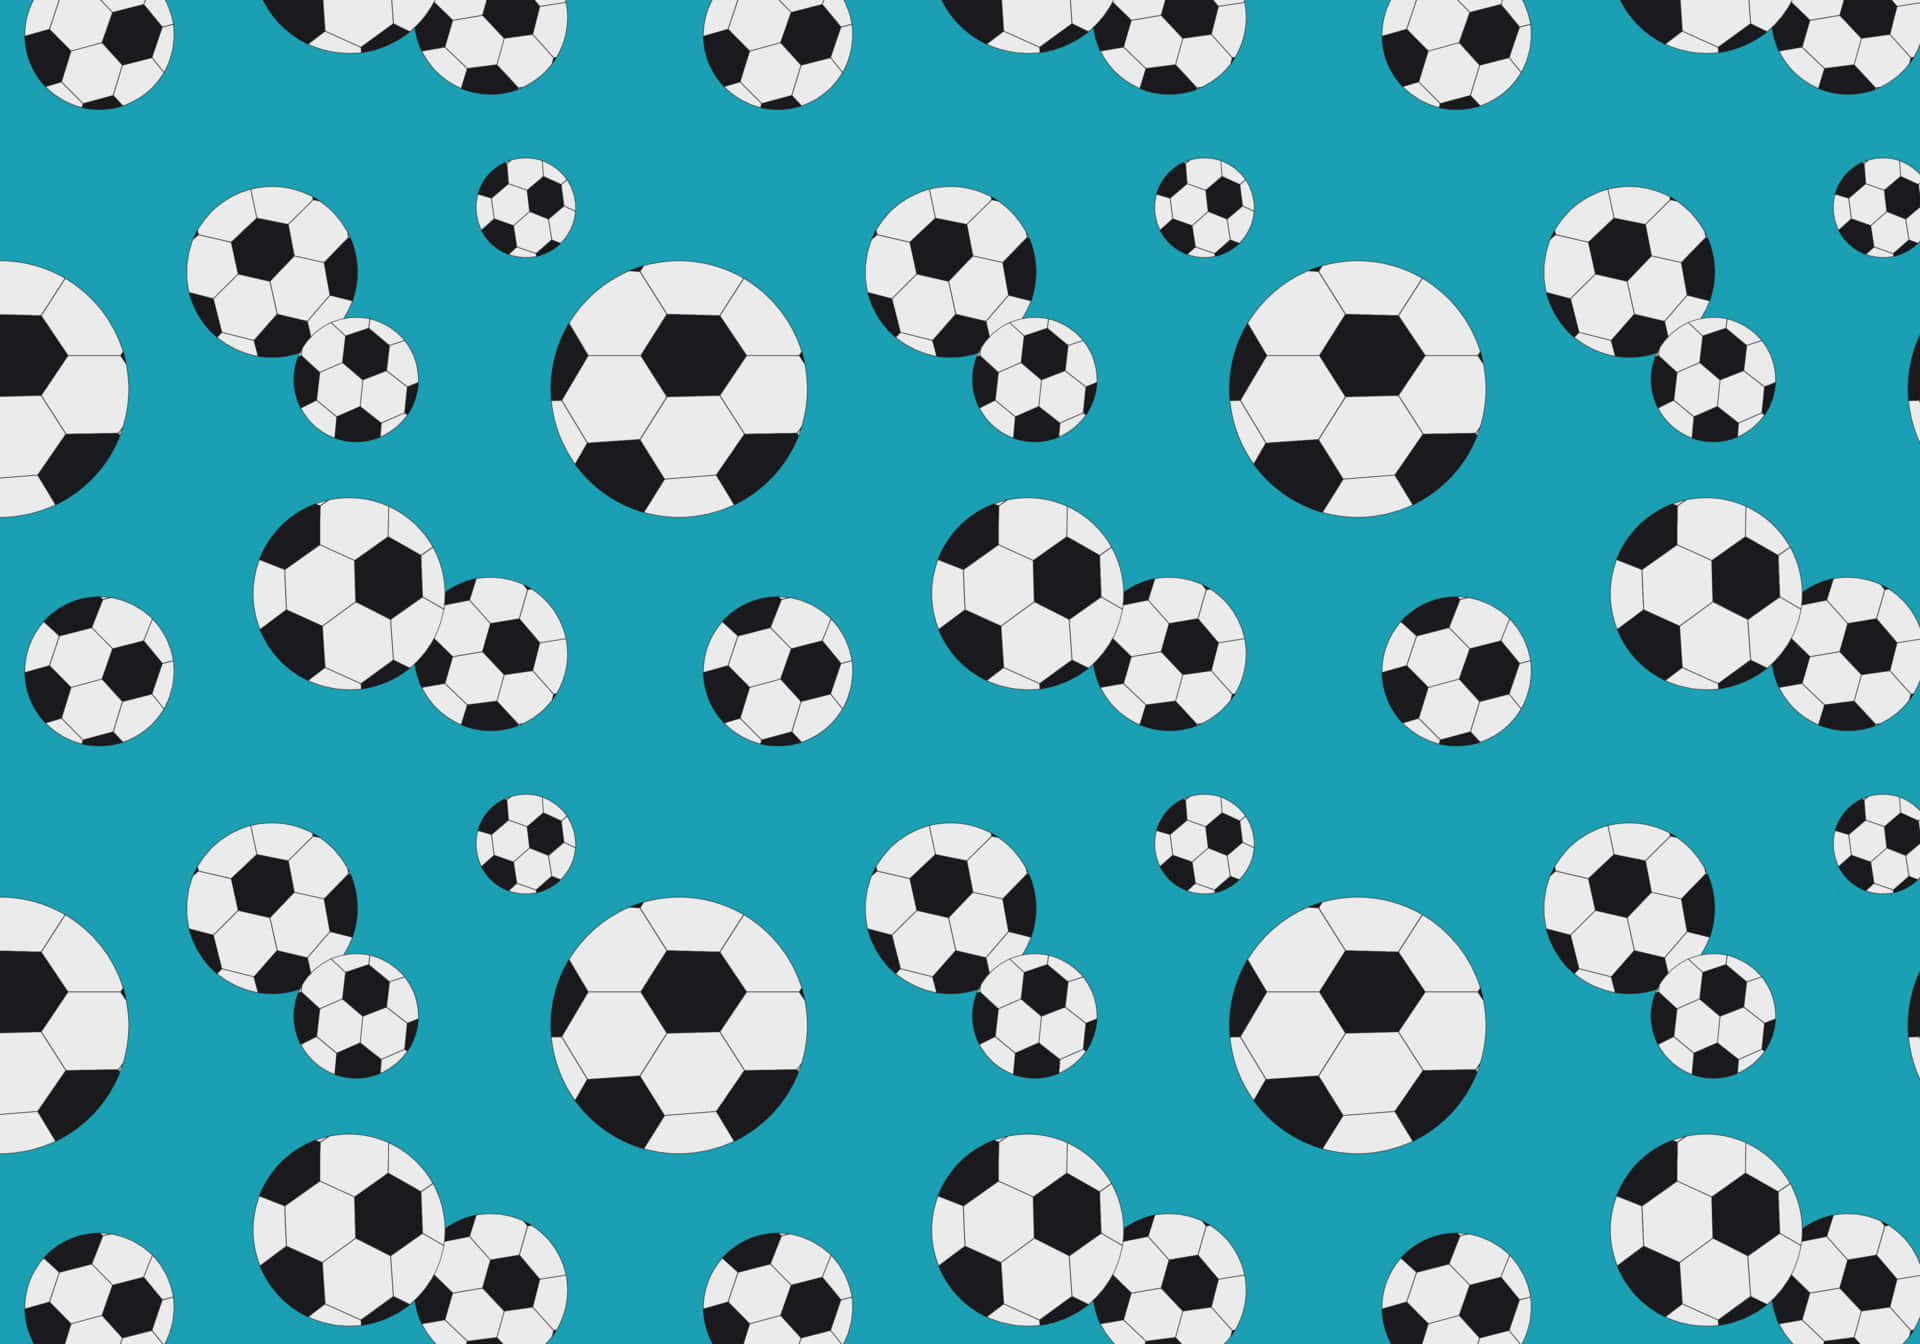 "Soccer with a Smile - Enjoy the Game!" Wallpaper